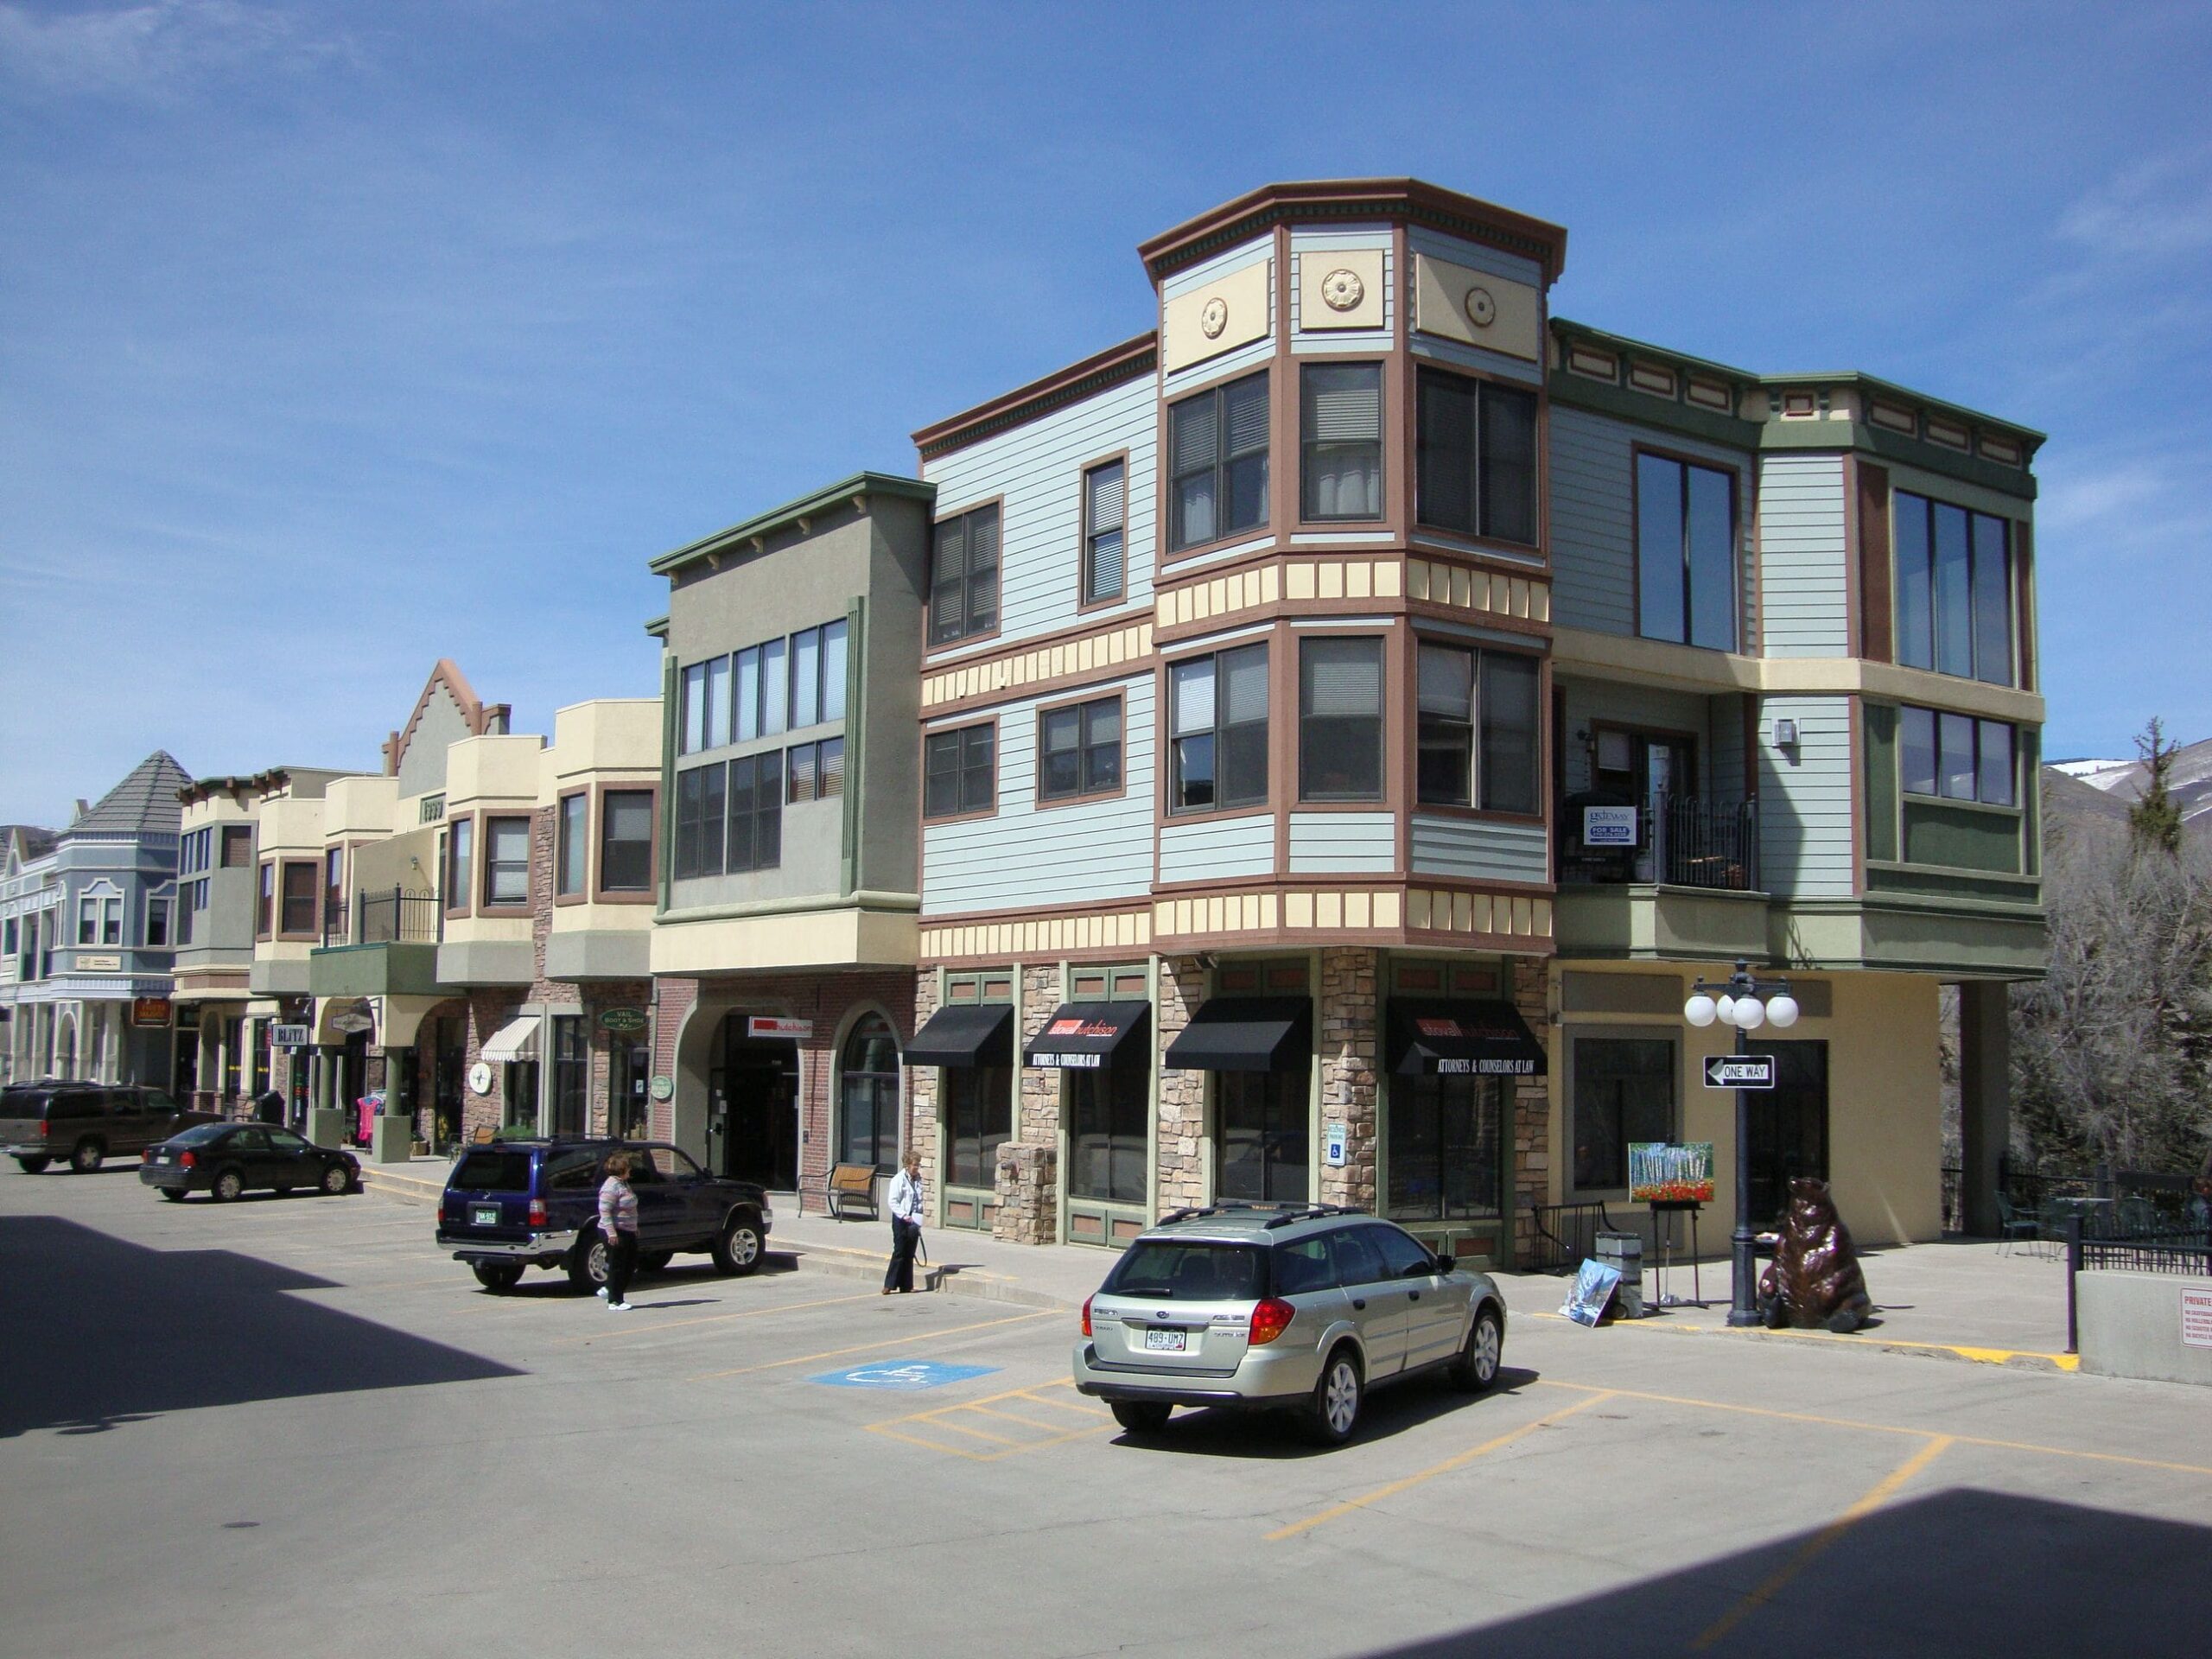 Wide angle view of the corner of the Emerald Building at Riverwalk at Edwards, Colorado.